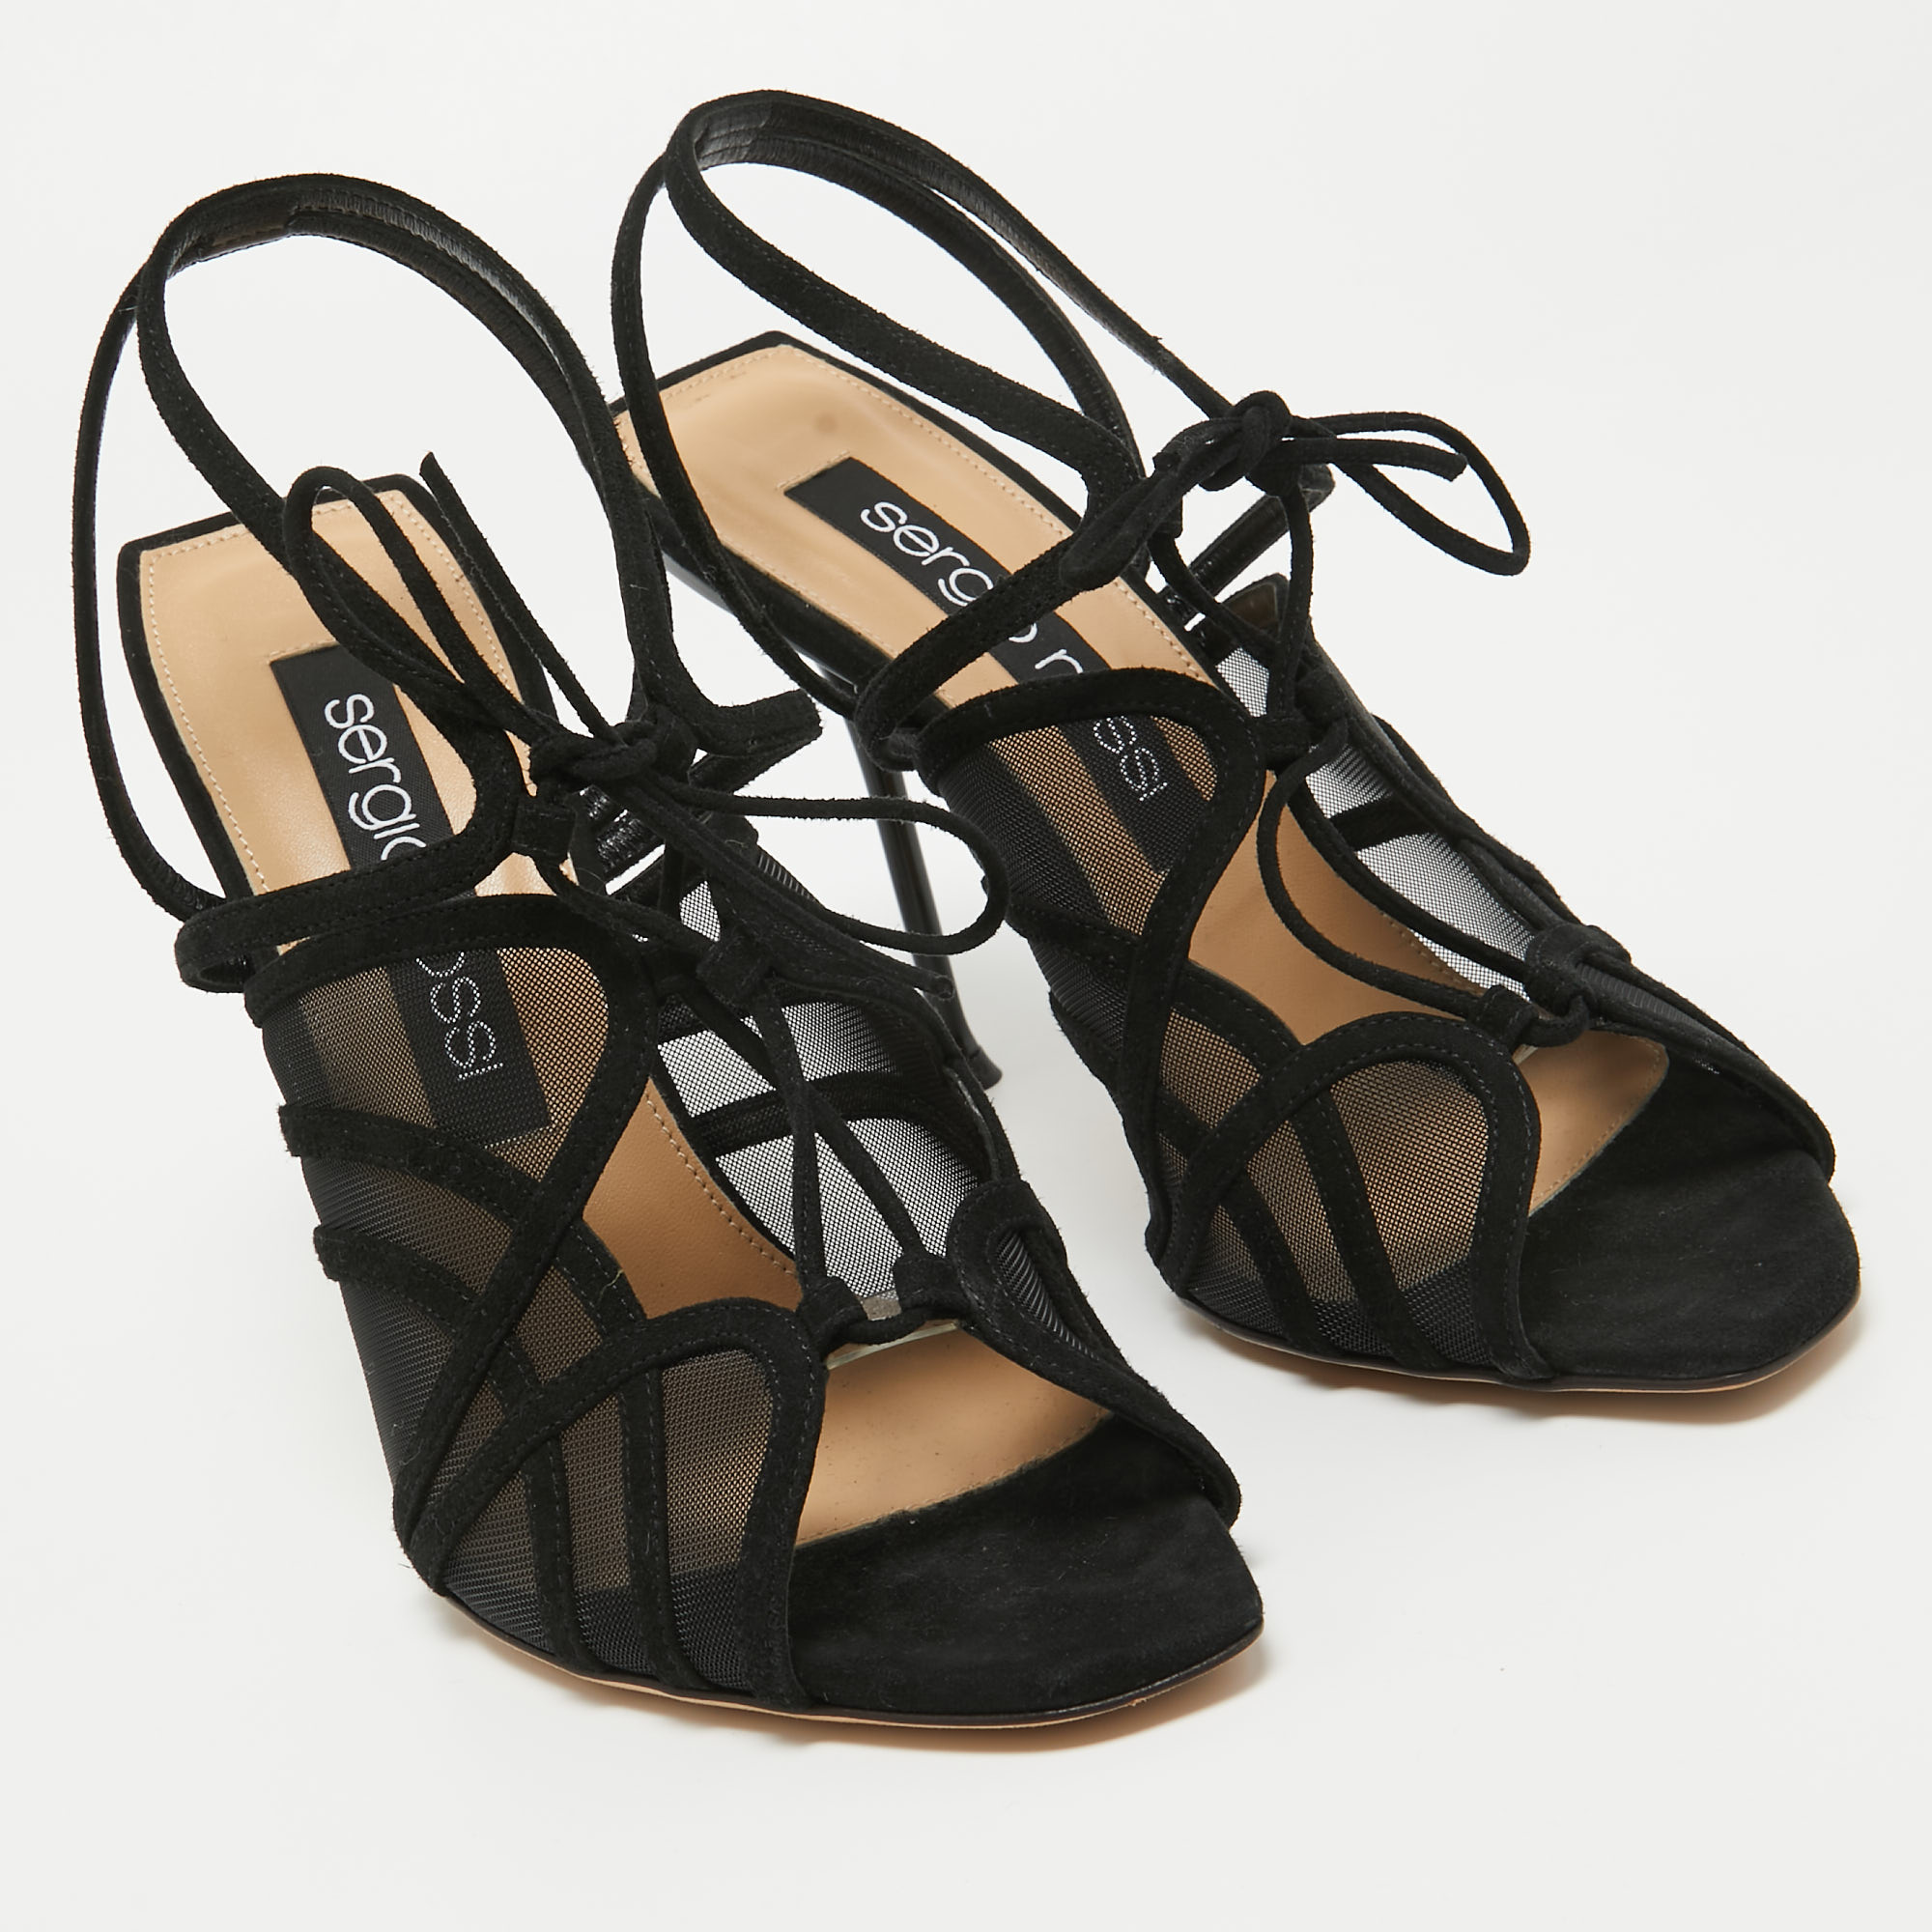 Sergio Rossi Black Suede And Mesh Ankle Strap Sandals Size 40